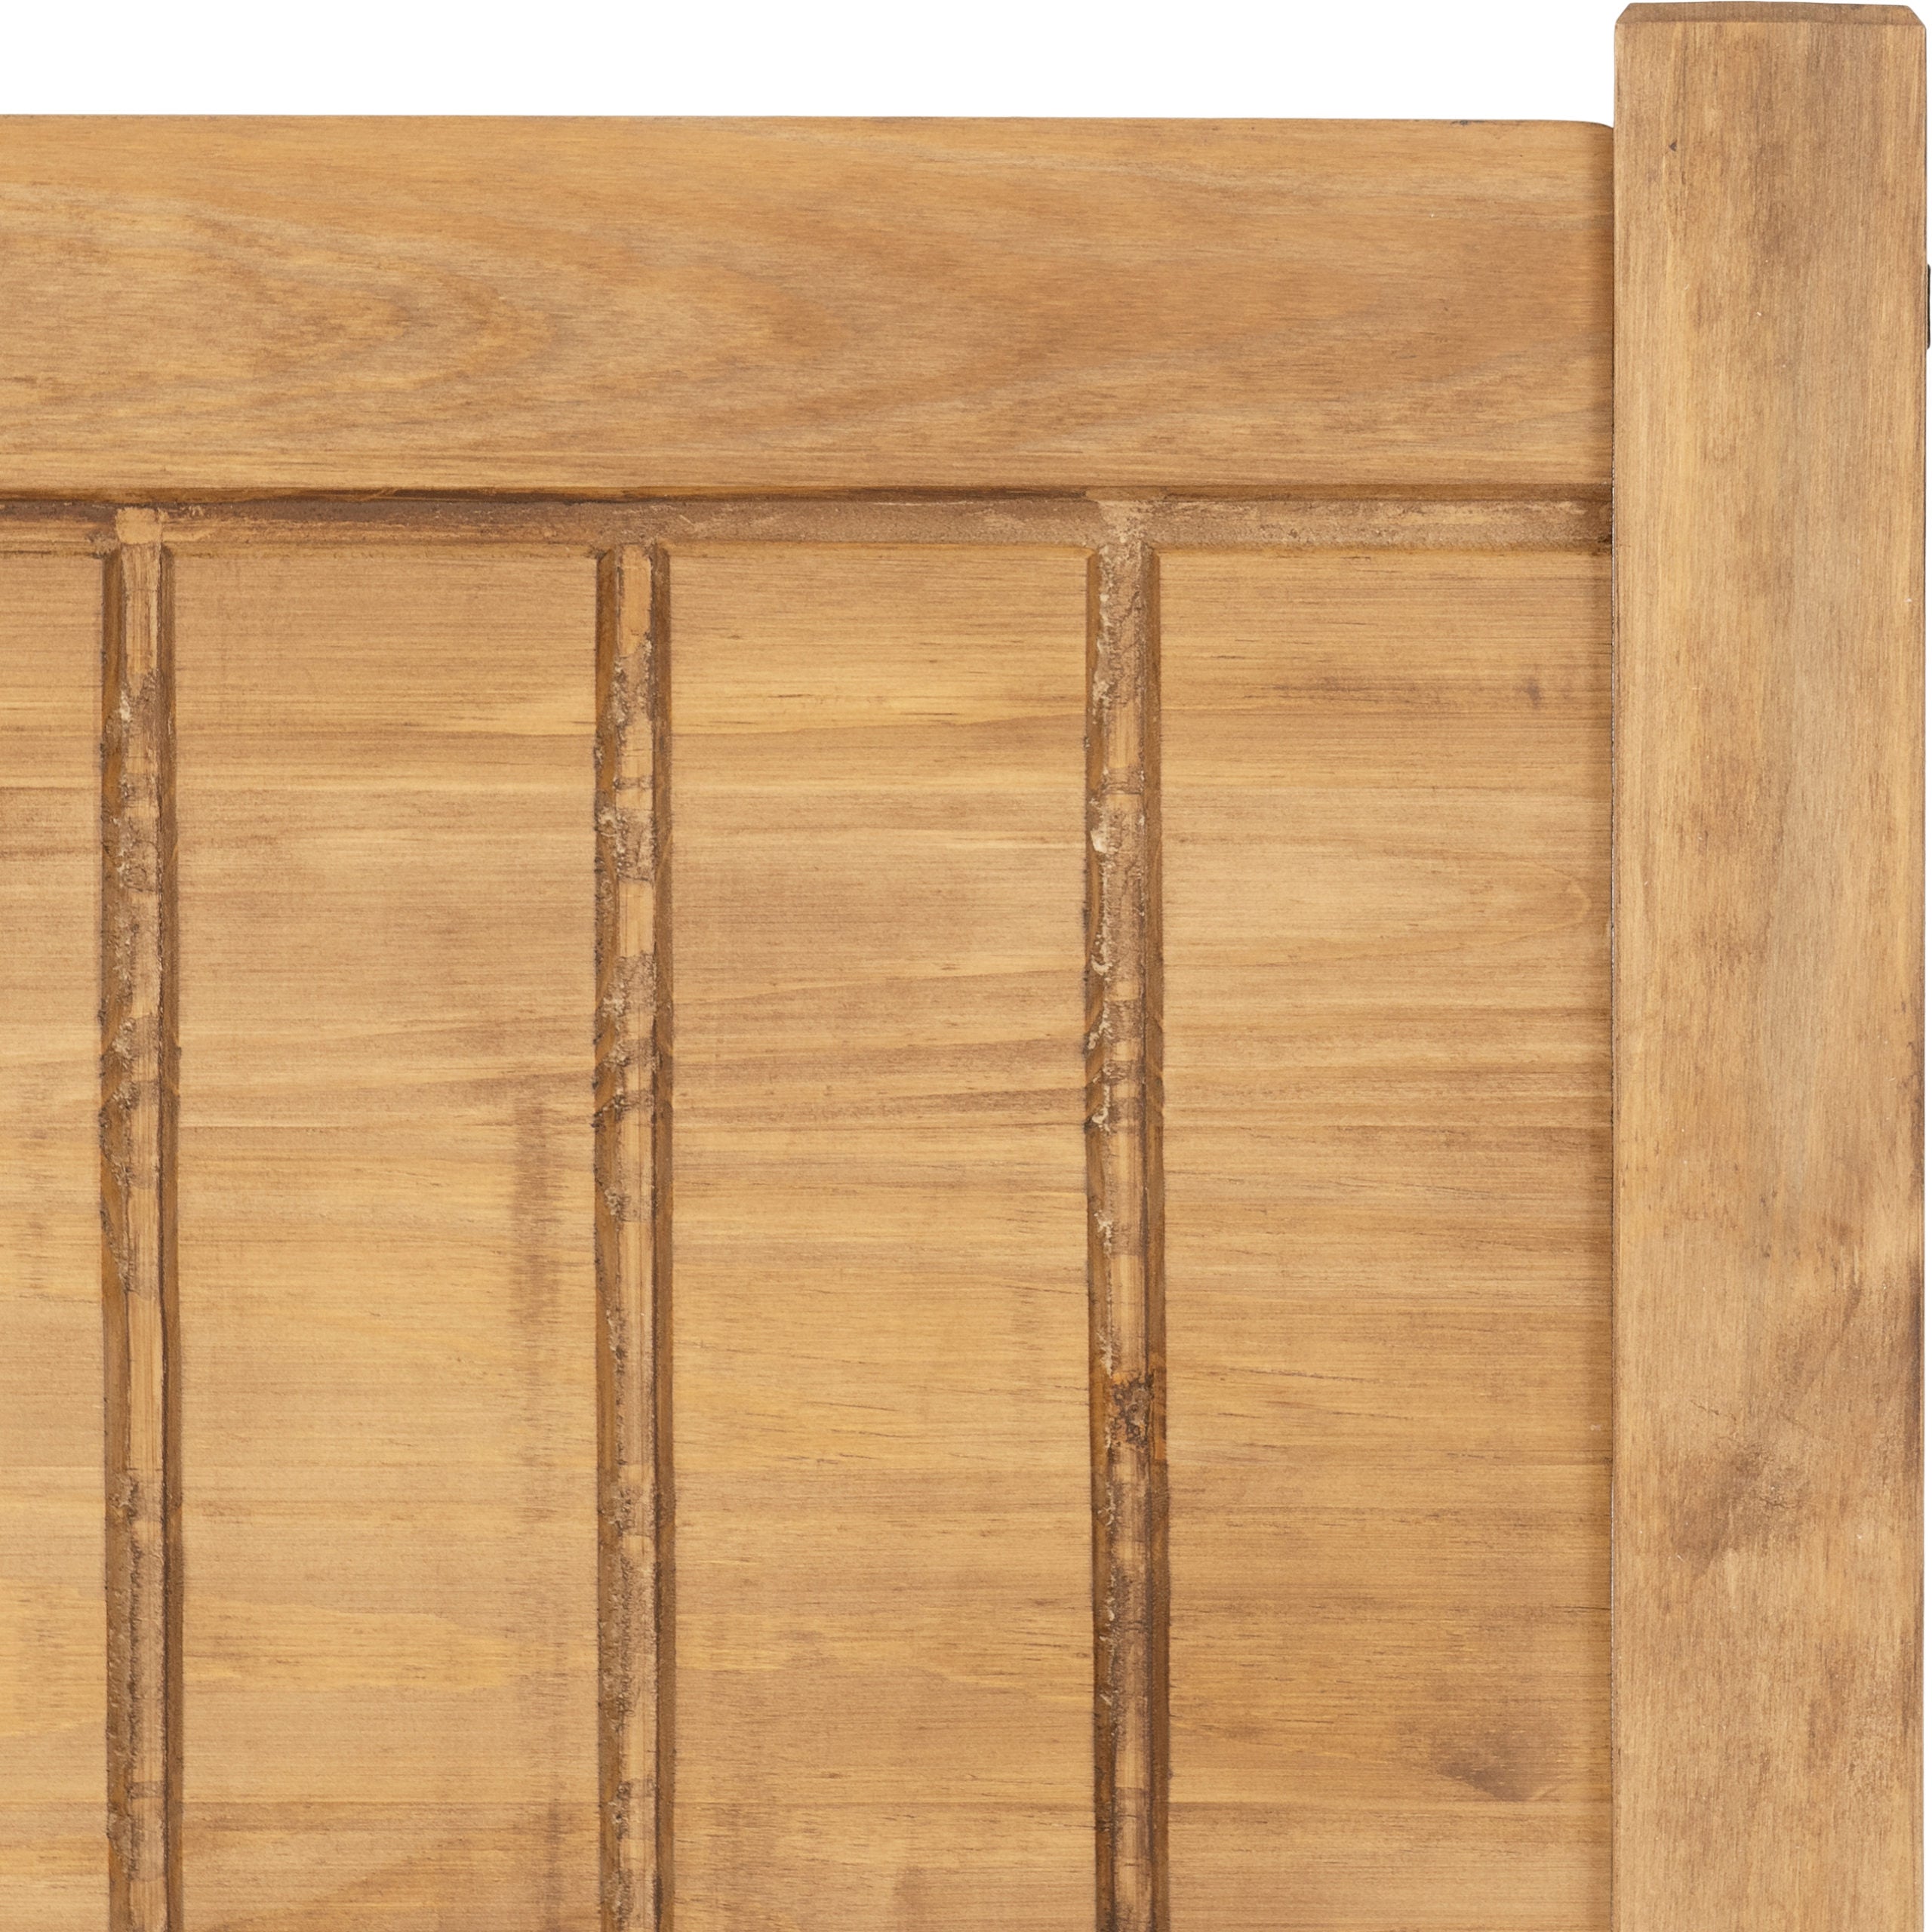 Maya Single 3ft Solid Distressed Wax Pine Wood Bed Frame